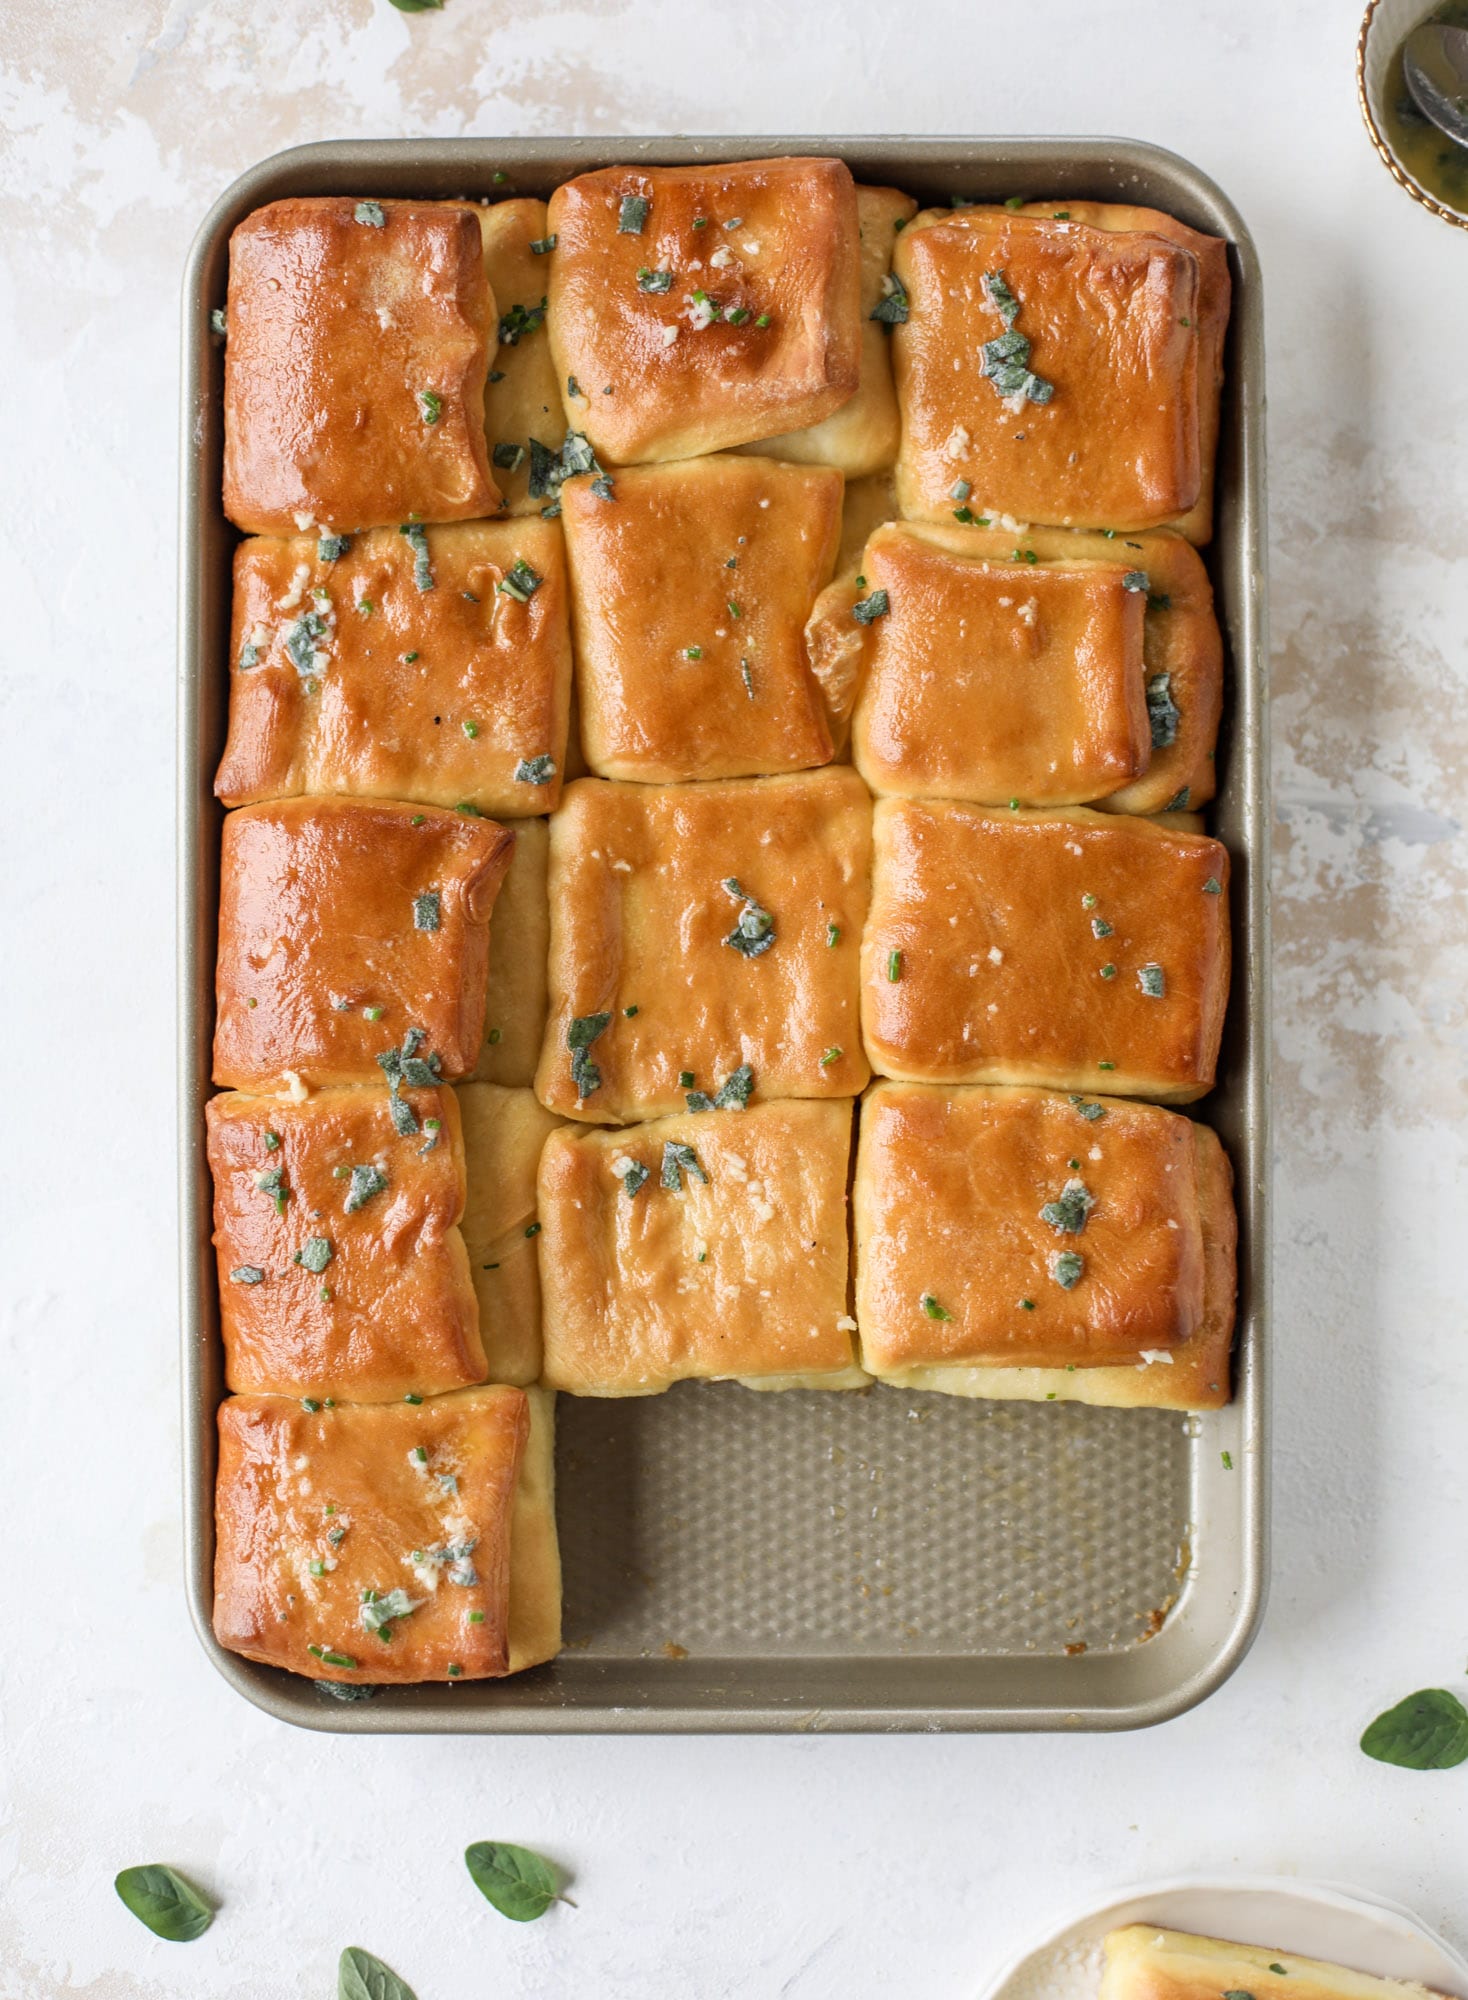 Garlic herb parker house rolls are full of incredibly buttery flavor! They are brushed with a garlic herb butter and are super fluffy, soft and tender. Perfect for Thanksgiving or the holidays and you can make the dough a bit ahead of time! I howsweeteats.com #parkerhouse #rolls